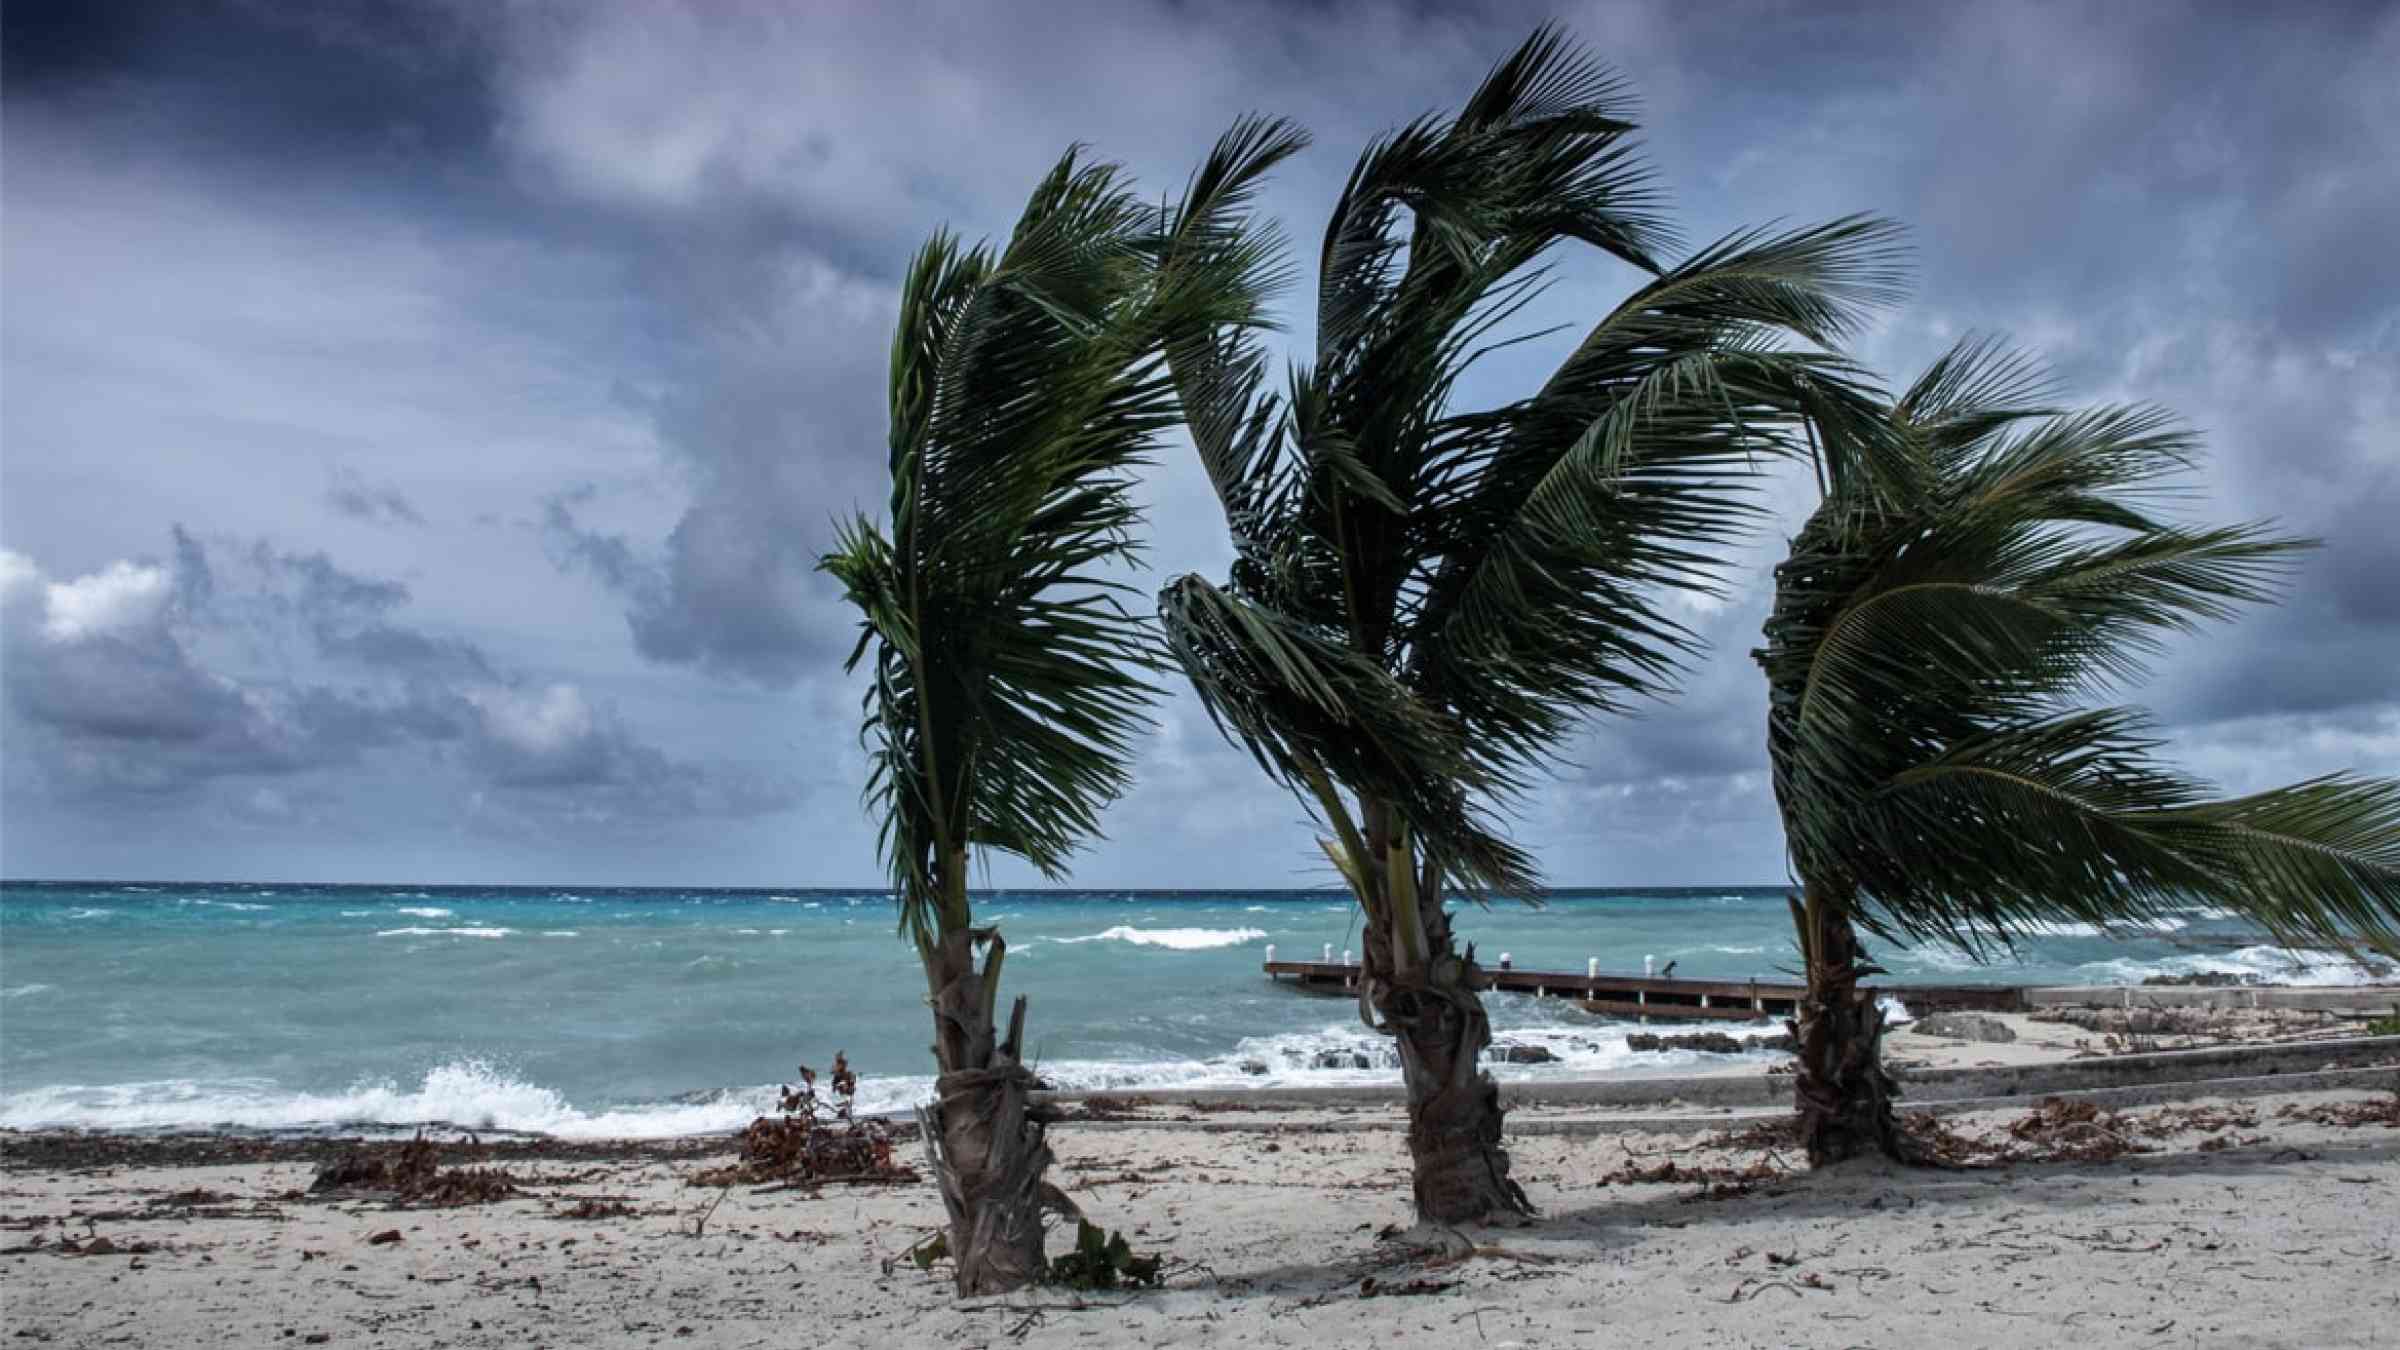 Impact of a hurricane in the Cayman Islands